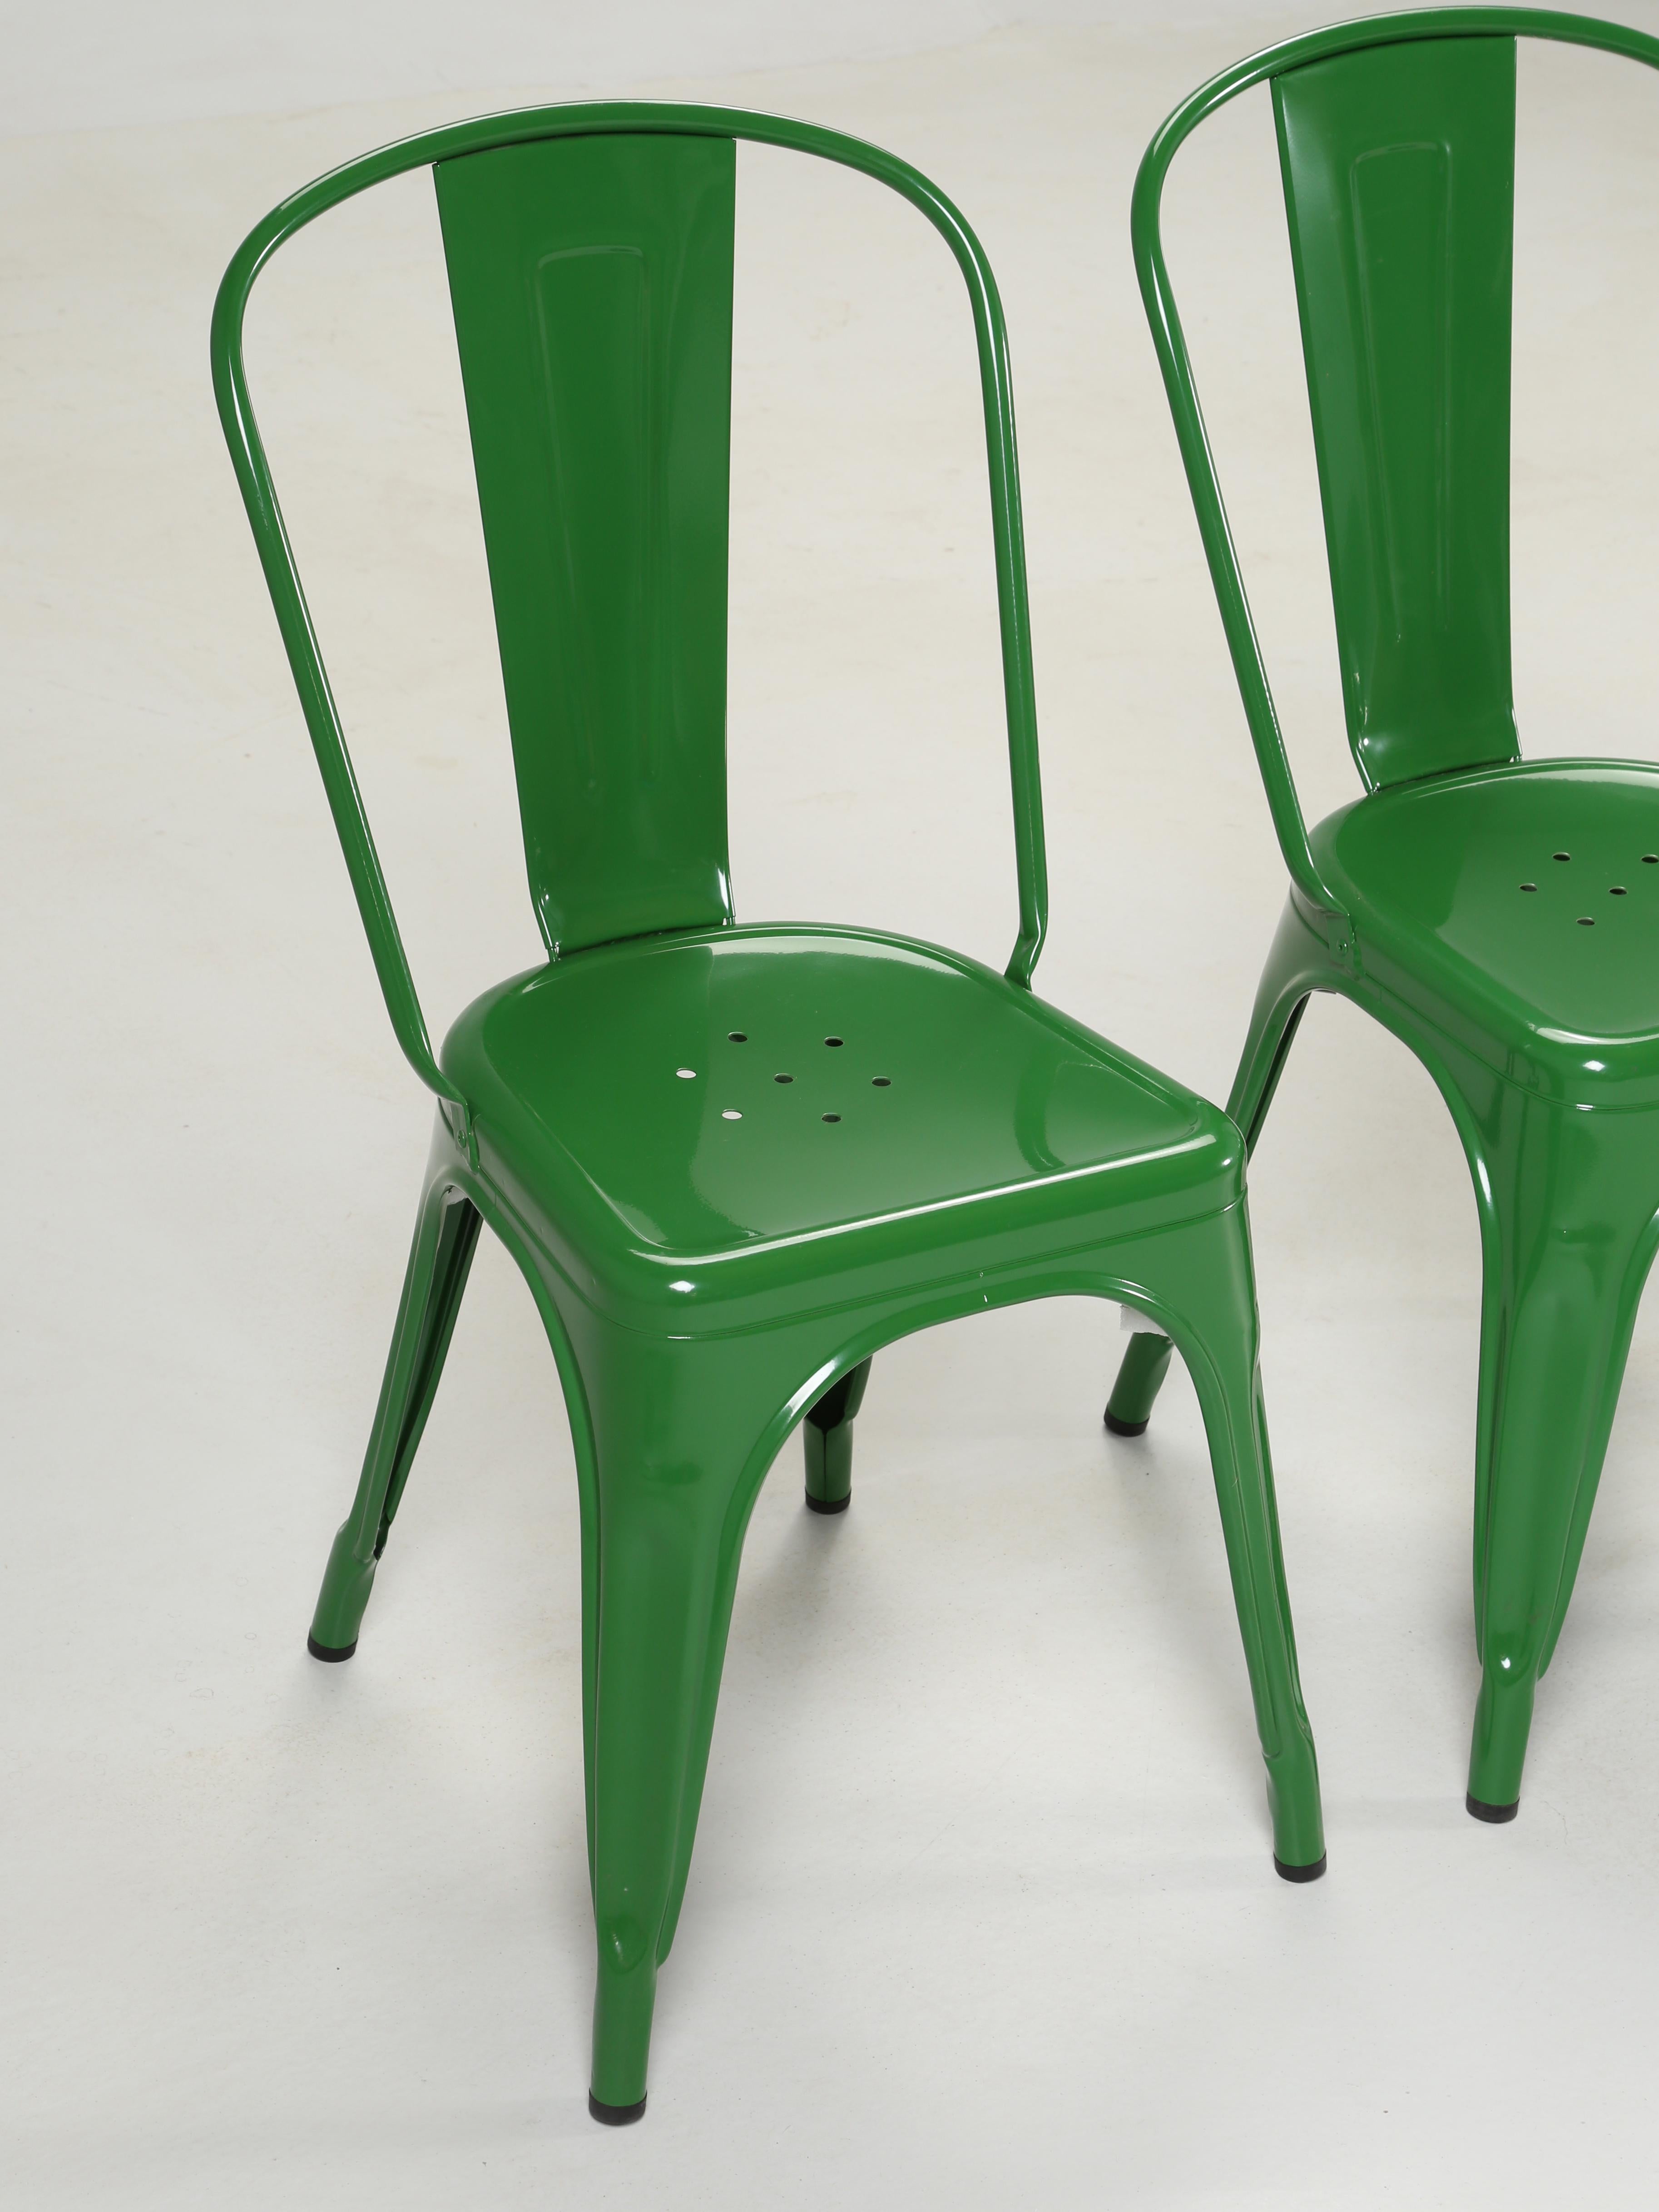 Industrial Genuine French Tolix Steel Stacking Chairs Set (5) in a Beautiful Bright Green For Sale